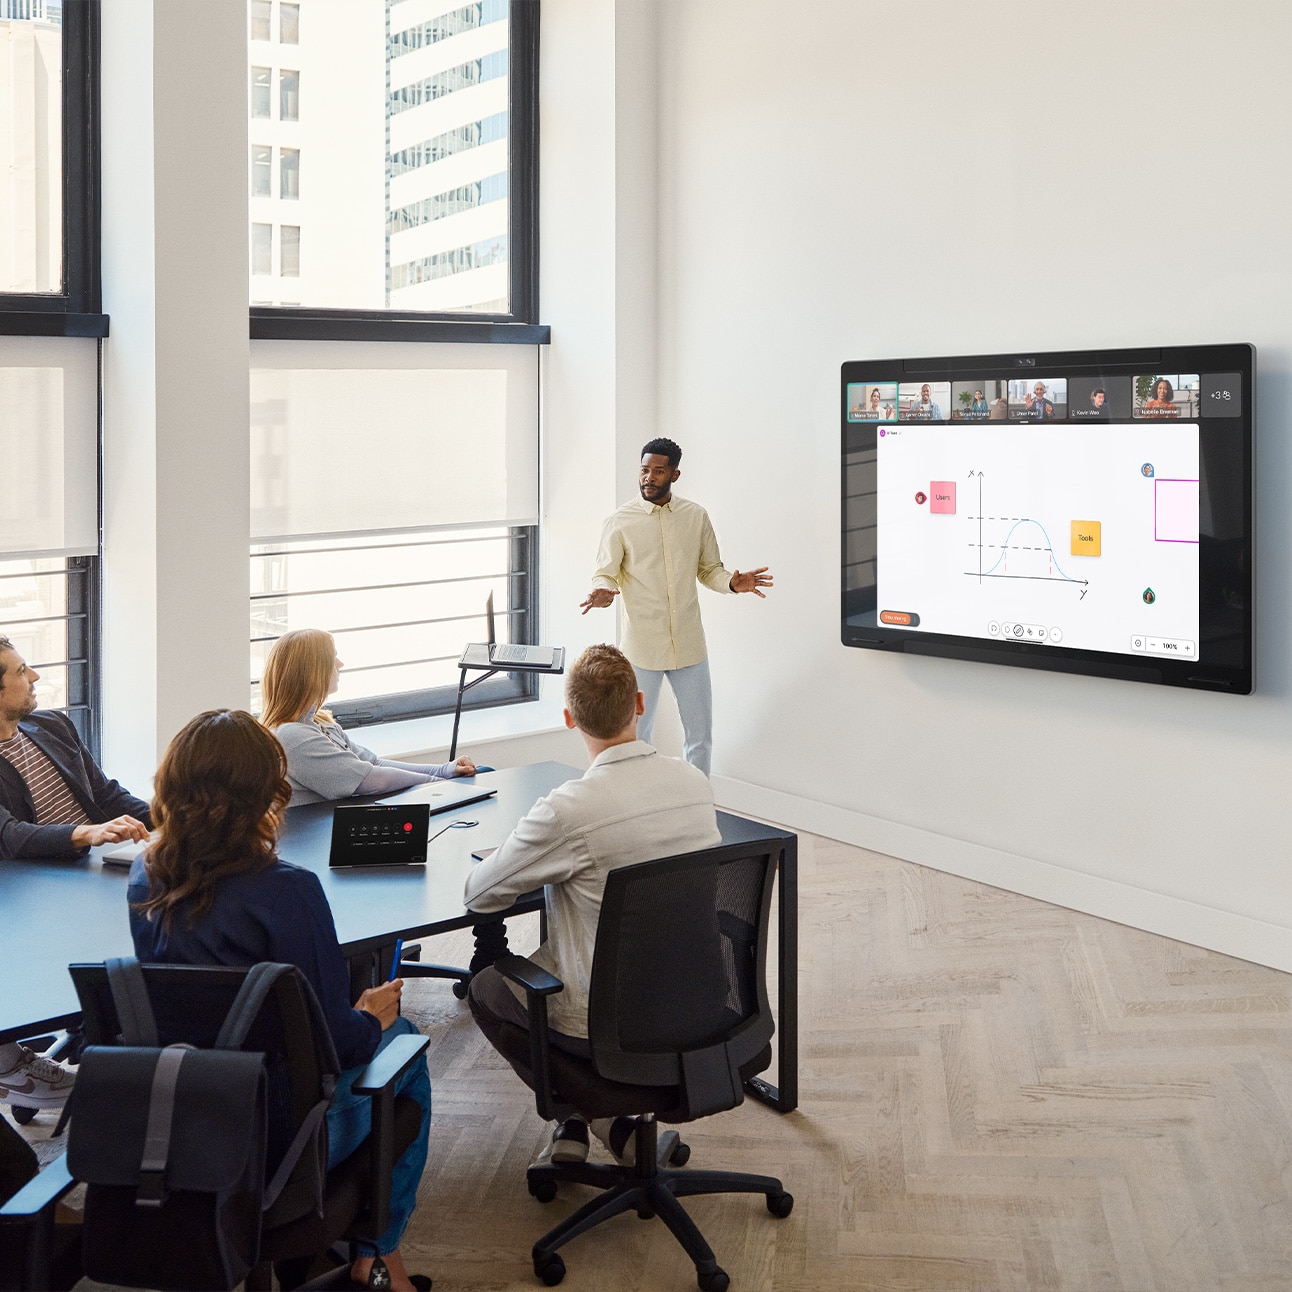 Five people collaborating in a medium-sized conference room using the wall-mounted Cisco Board Pro and the tabletop Cisco Room Navigator control panel. One person is standing close to the Board Pro to hold a presentation using the touch screen which shows a digital whiteboard canvas with sticky notes, shapes, and the live video of remote video meeting participants.